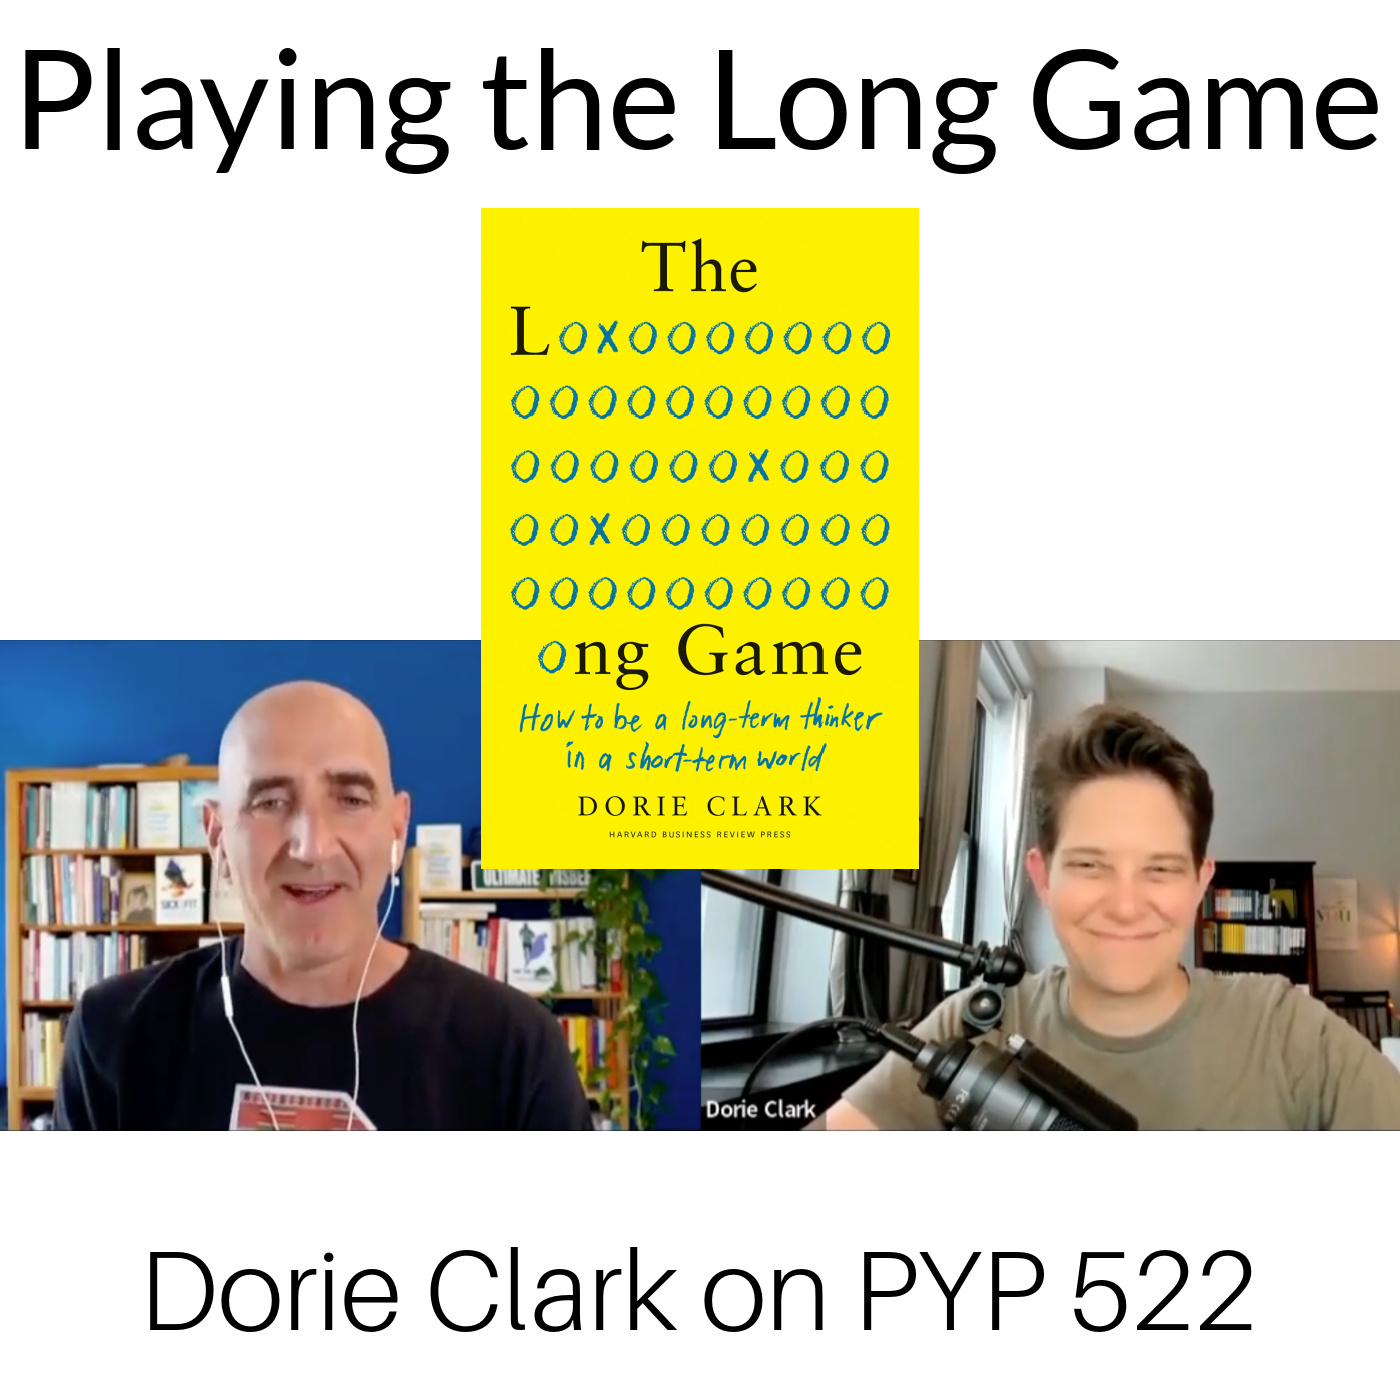 Playing the Long Game: Dorie Clark on PYP 522